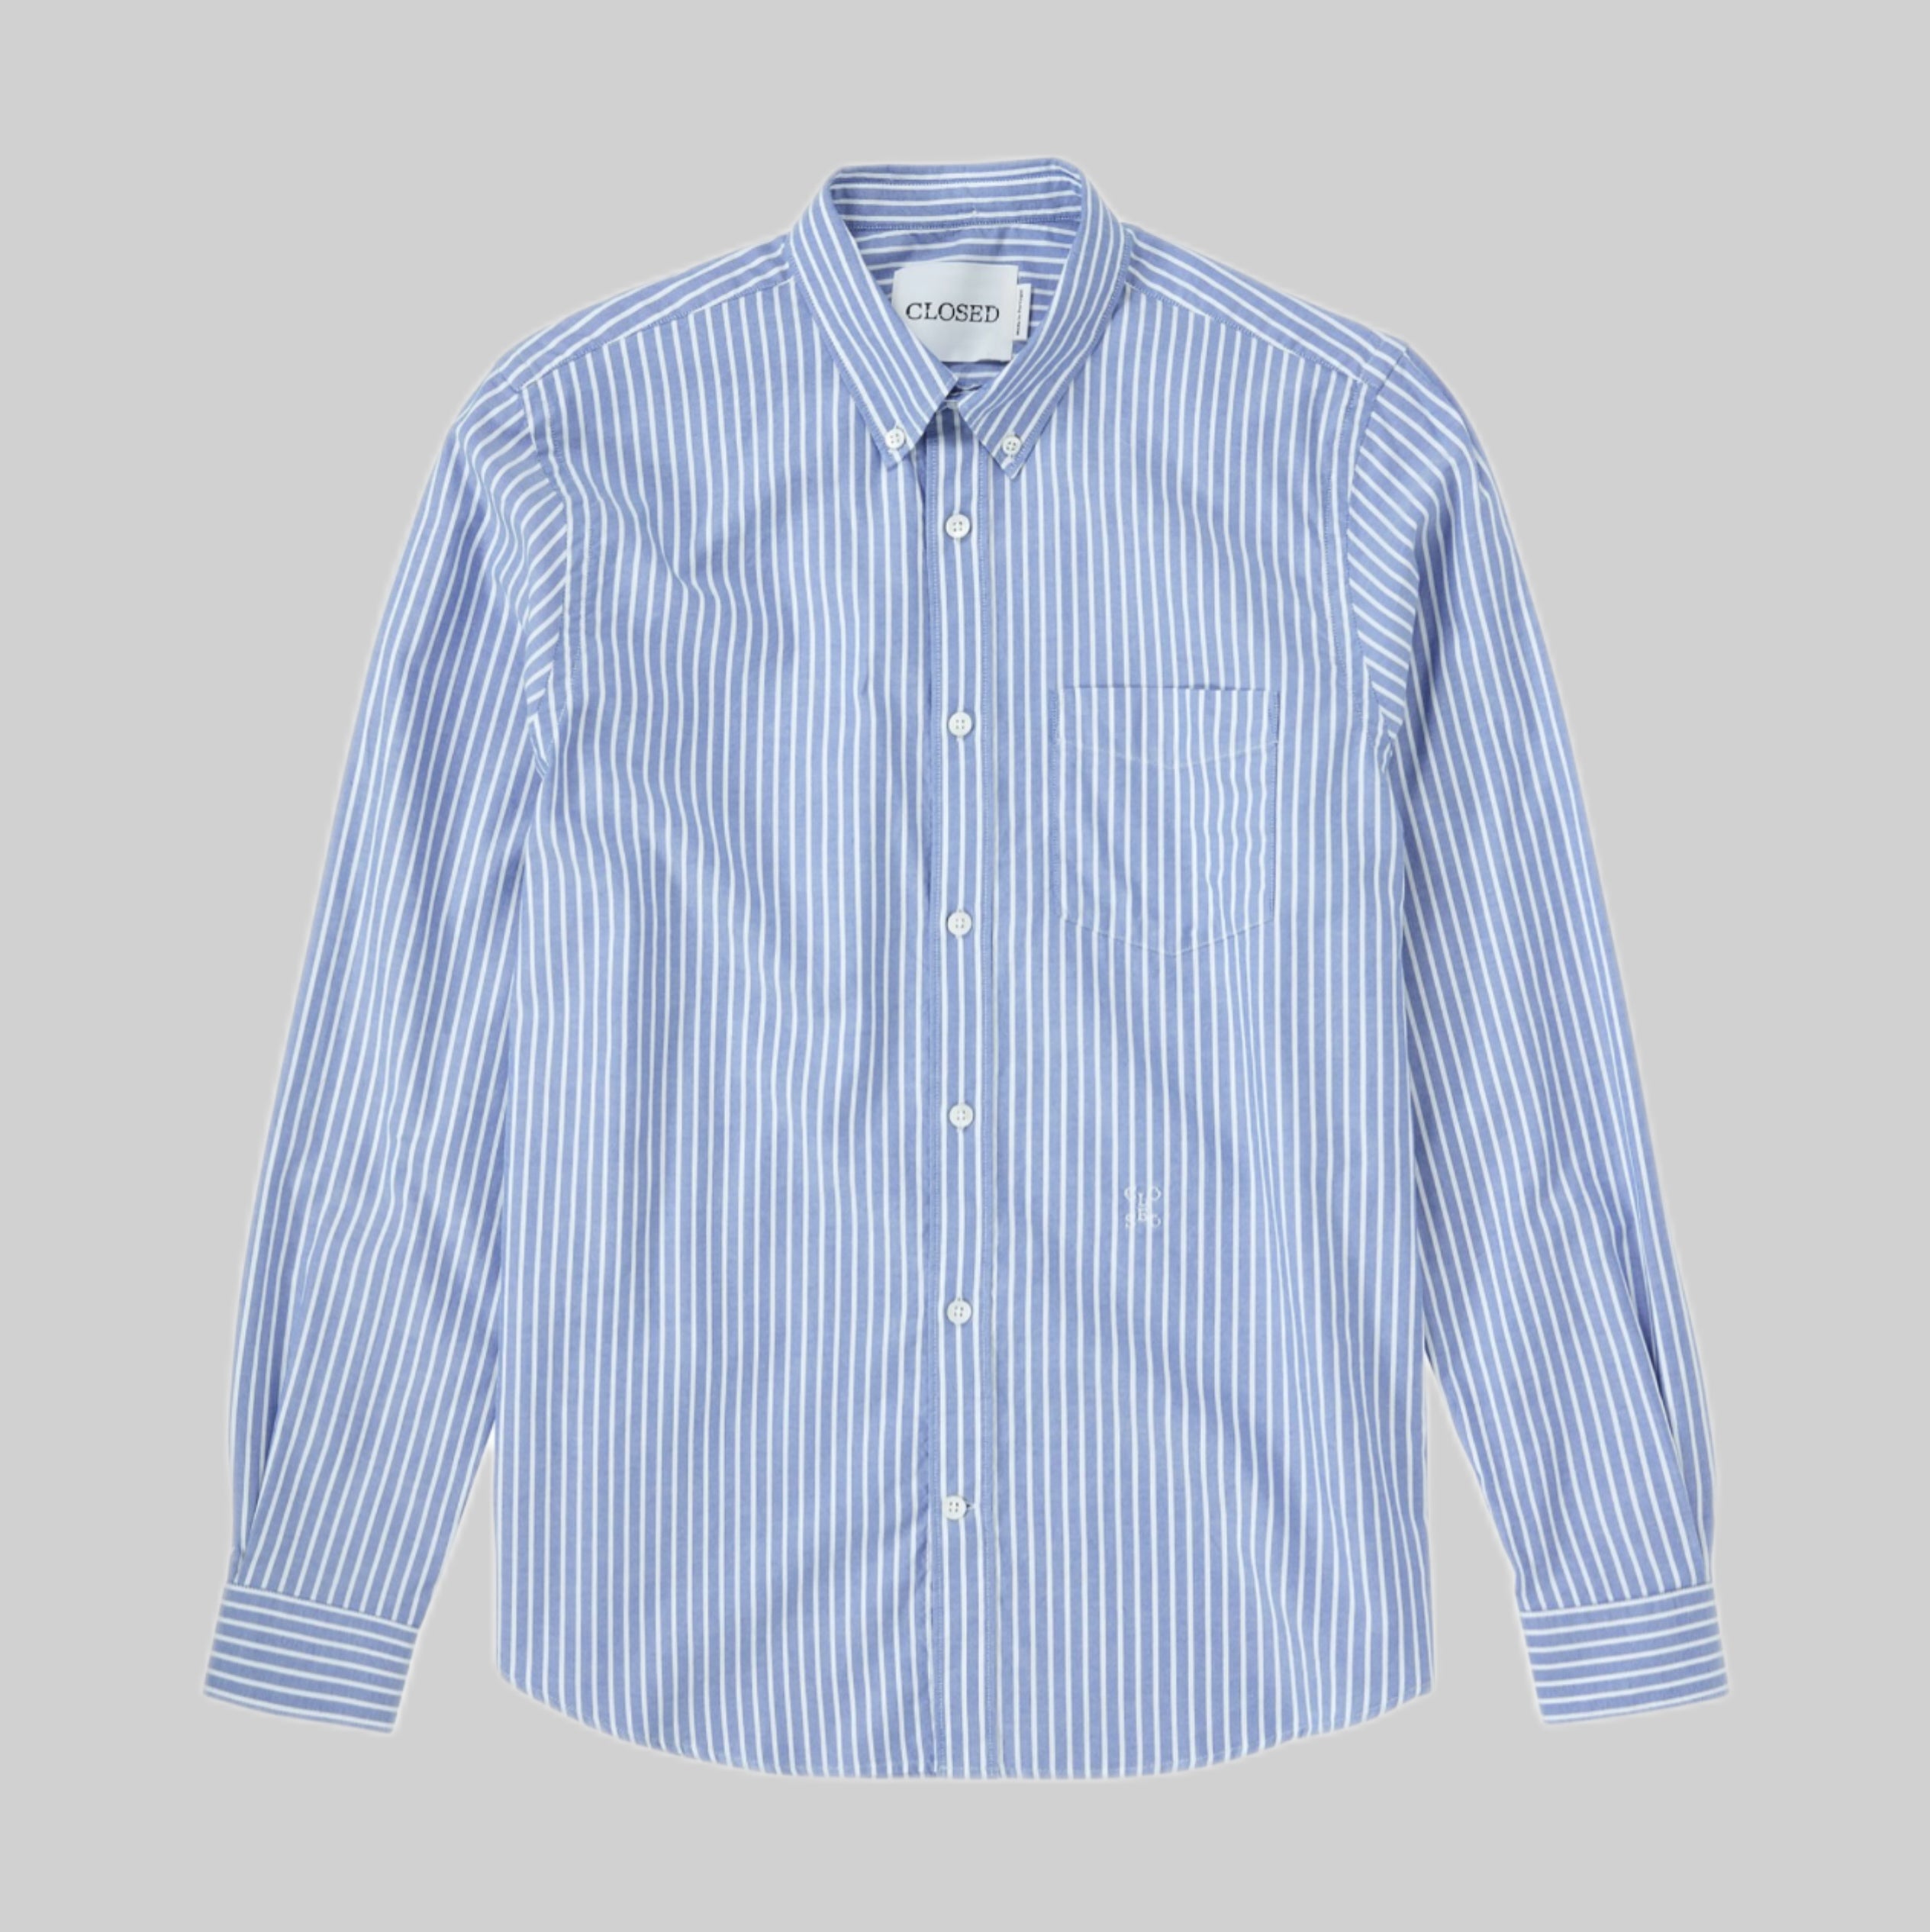 Closed shirt, men, frontside, blue and white, striped